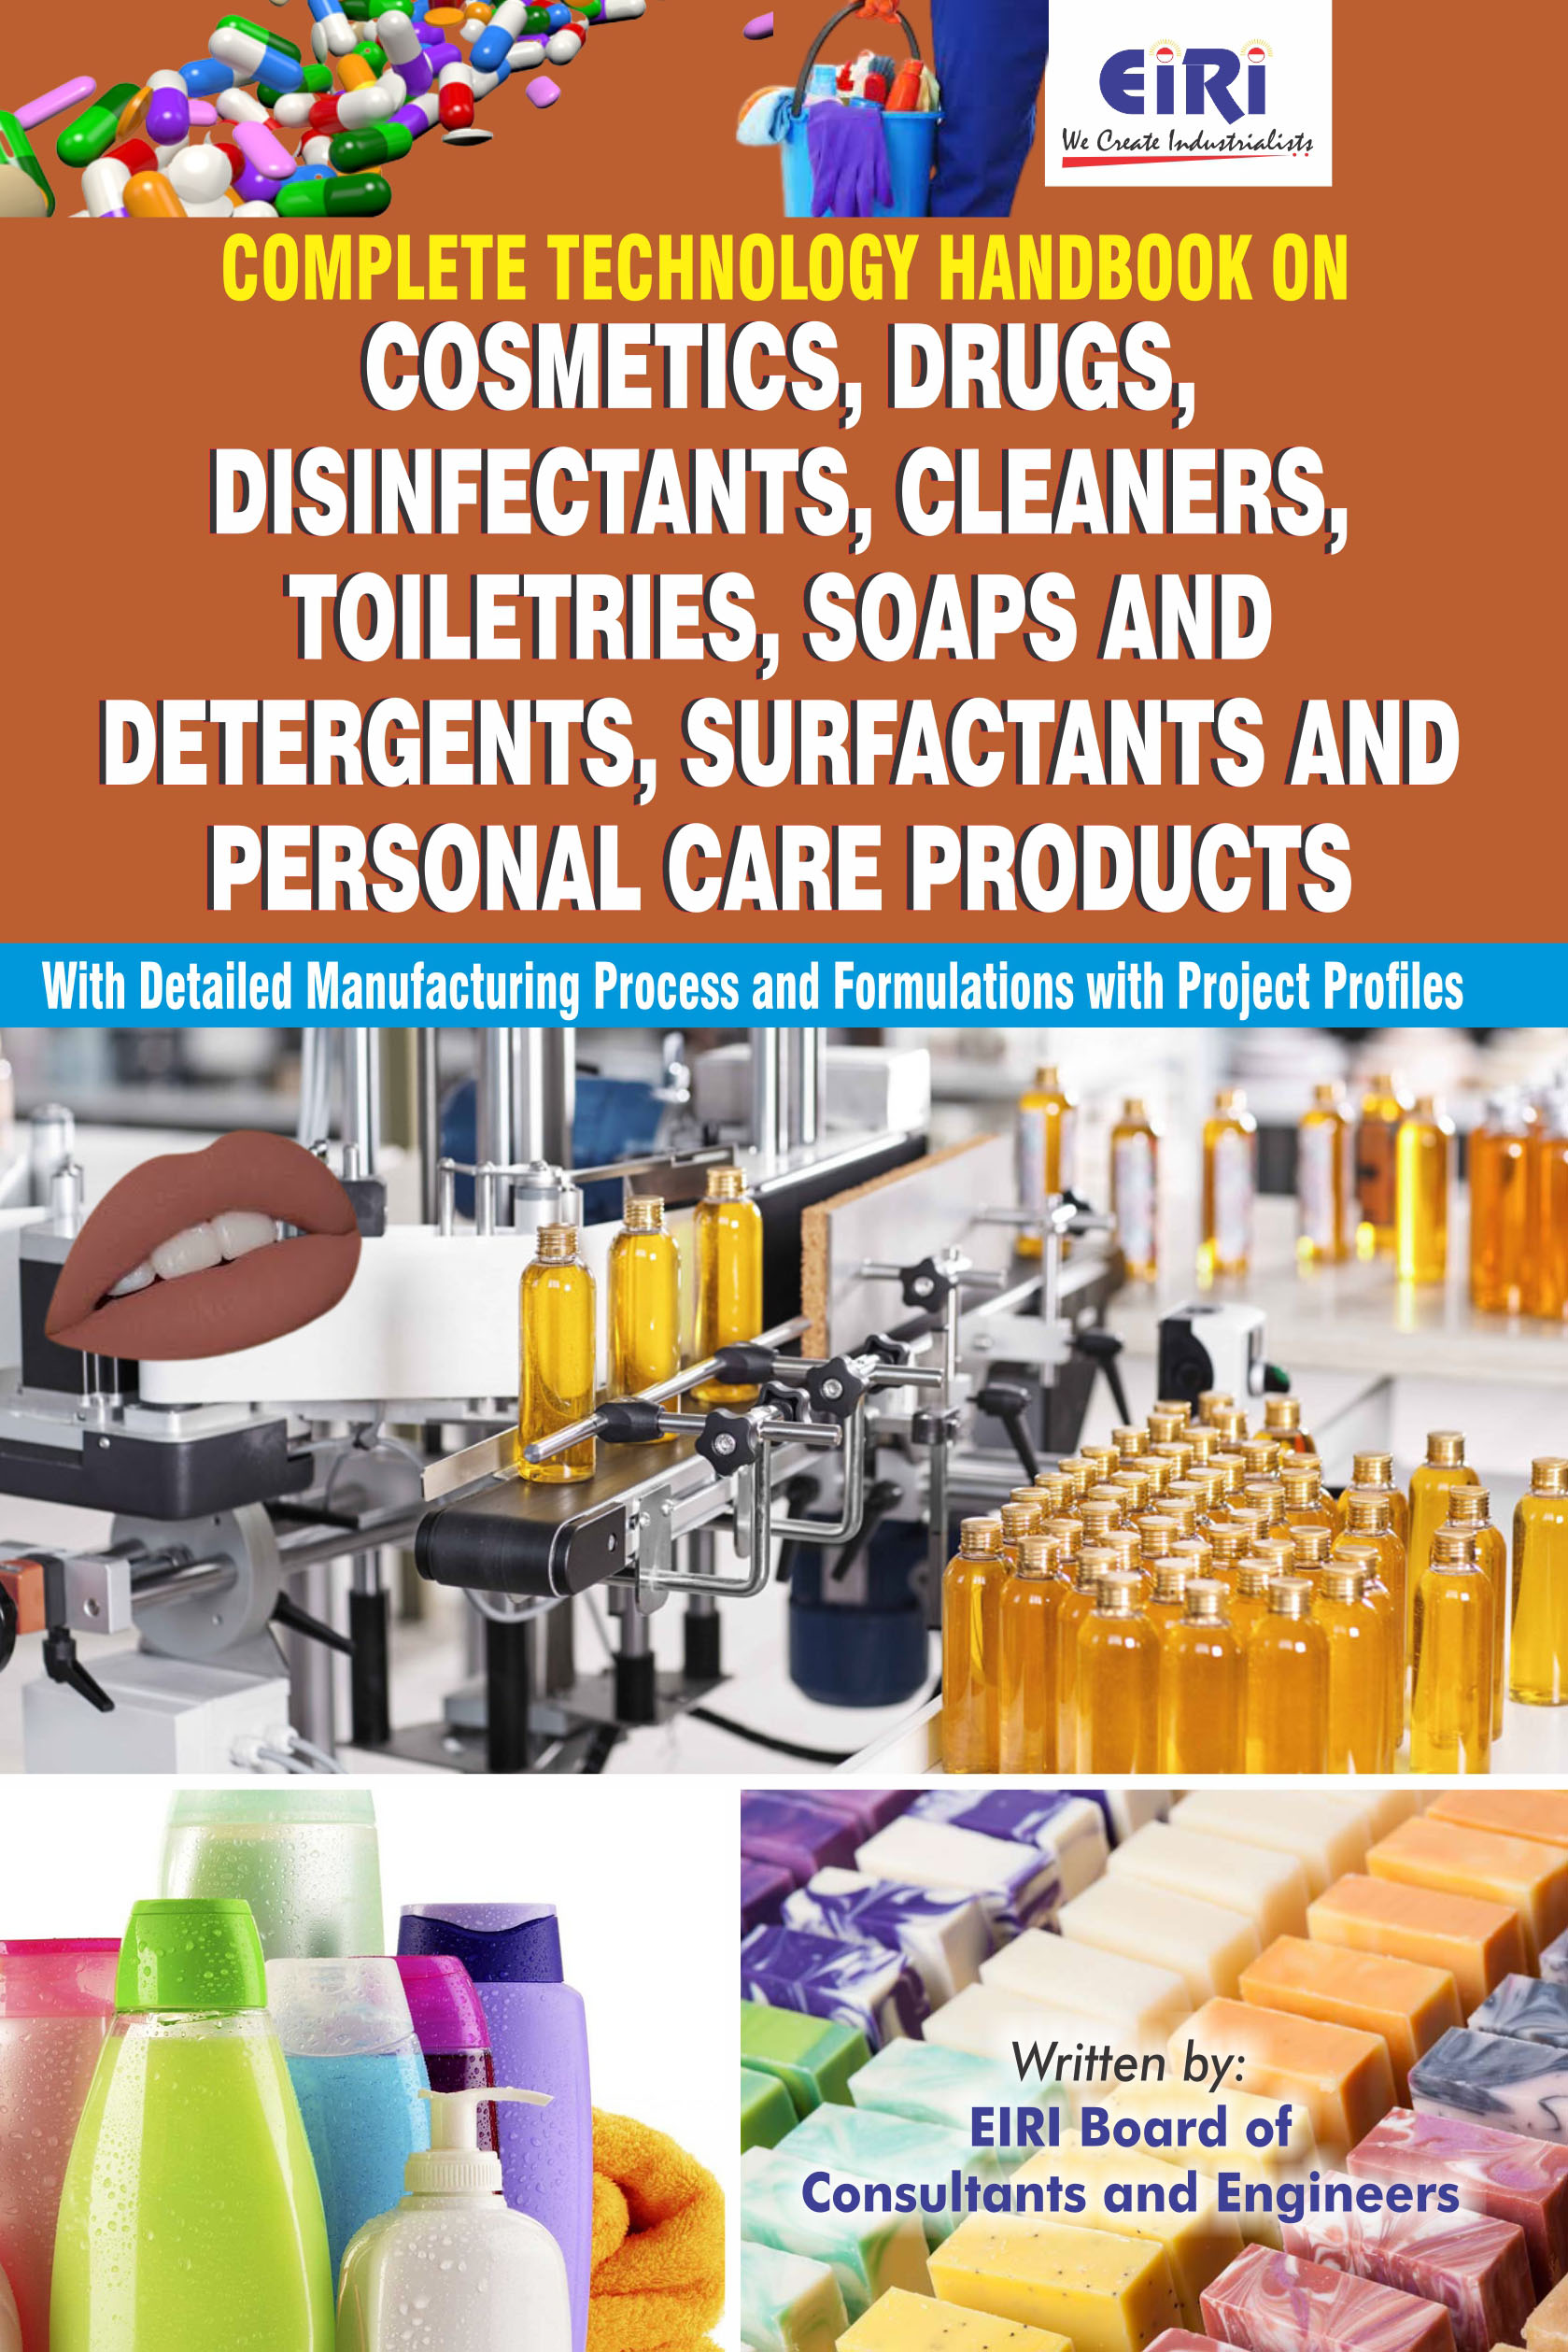 Complete Technology Handbook on Cosmetics, Drugs, Disinfectants, Cleaners, Toiletries, Soaps and Detergents, Surfactants and Personal Care Products with Detailed   Manufacturing   Process and Formulations with Project Profiles